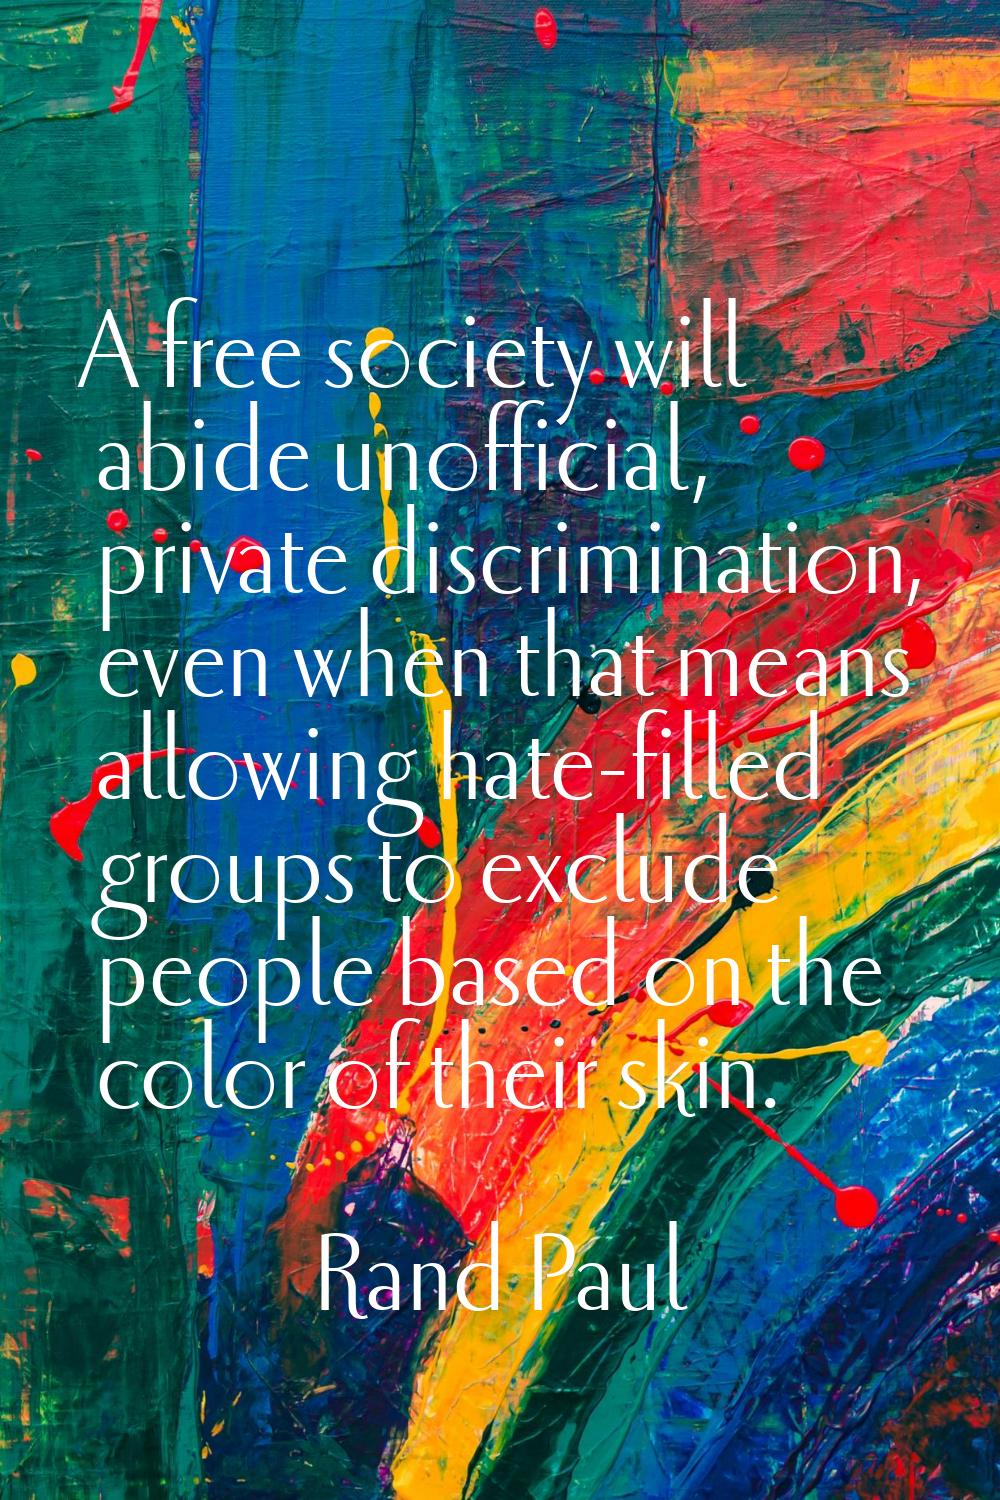 A free society will abide unofficial, private discrimination, even when that means allowing hate-fi